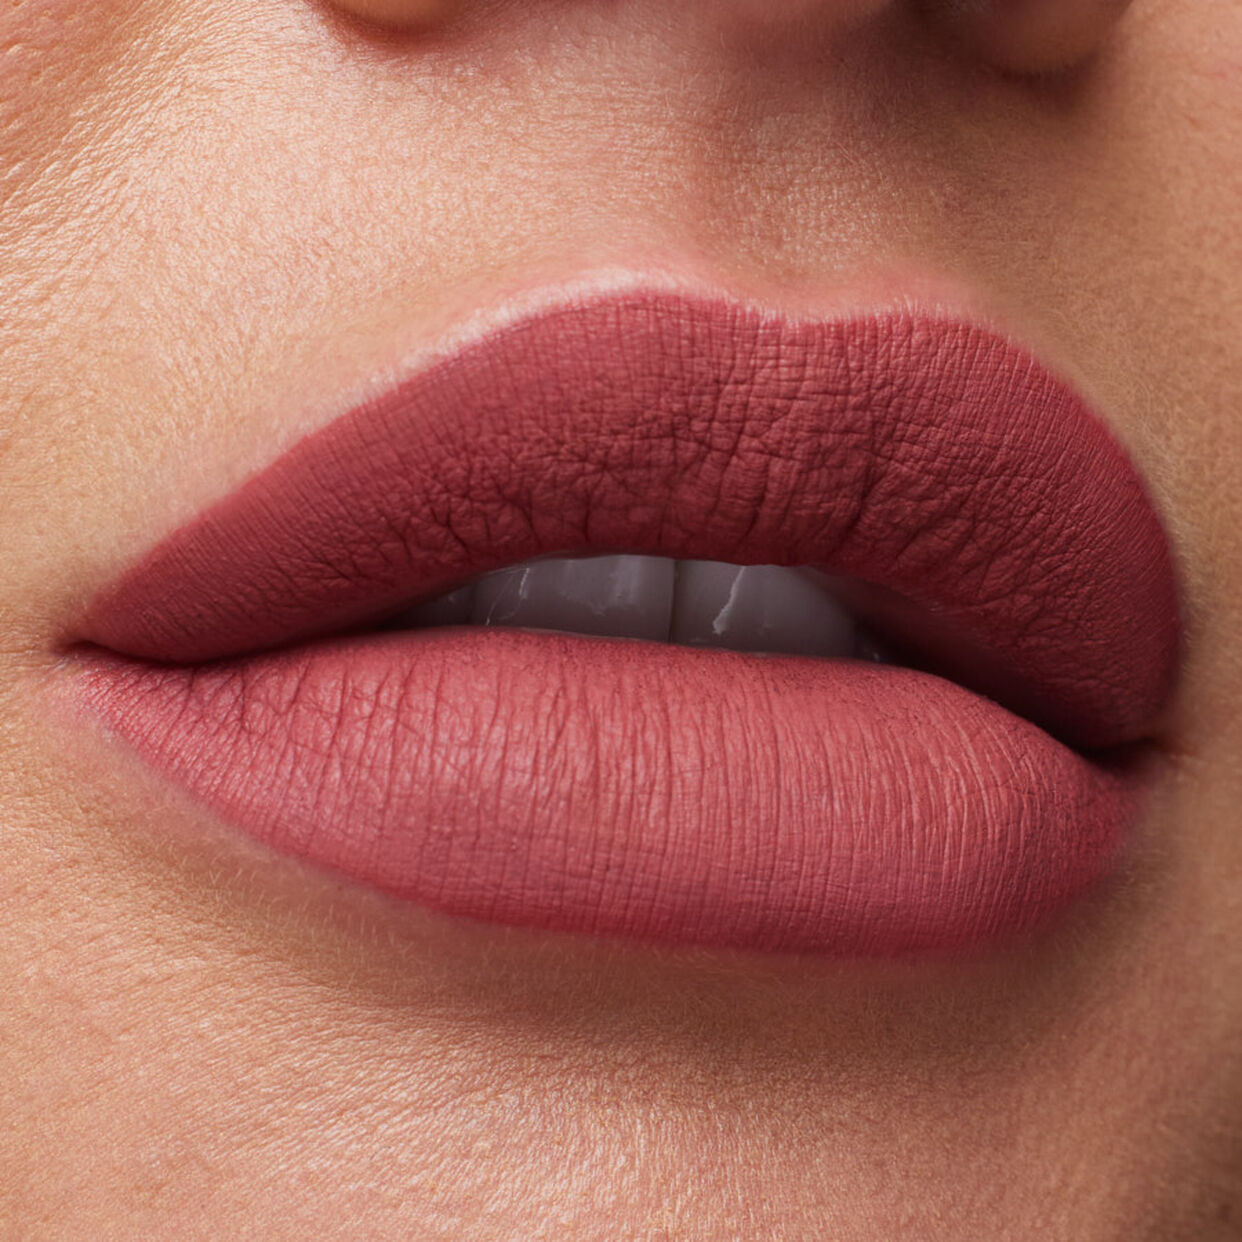 swatch image of Huda Beauty liquid lipstick in bombshell shade available at Heygirl.pk for delivery in Pakistan